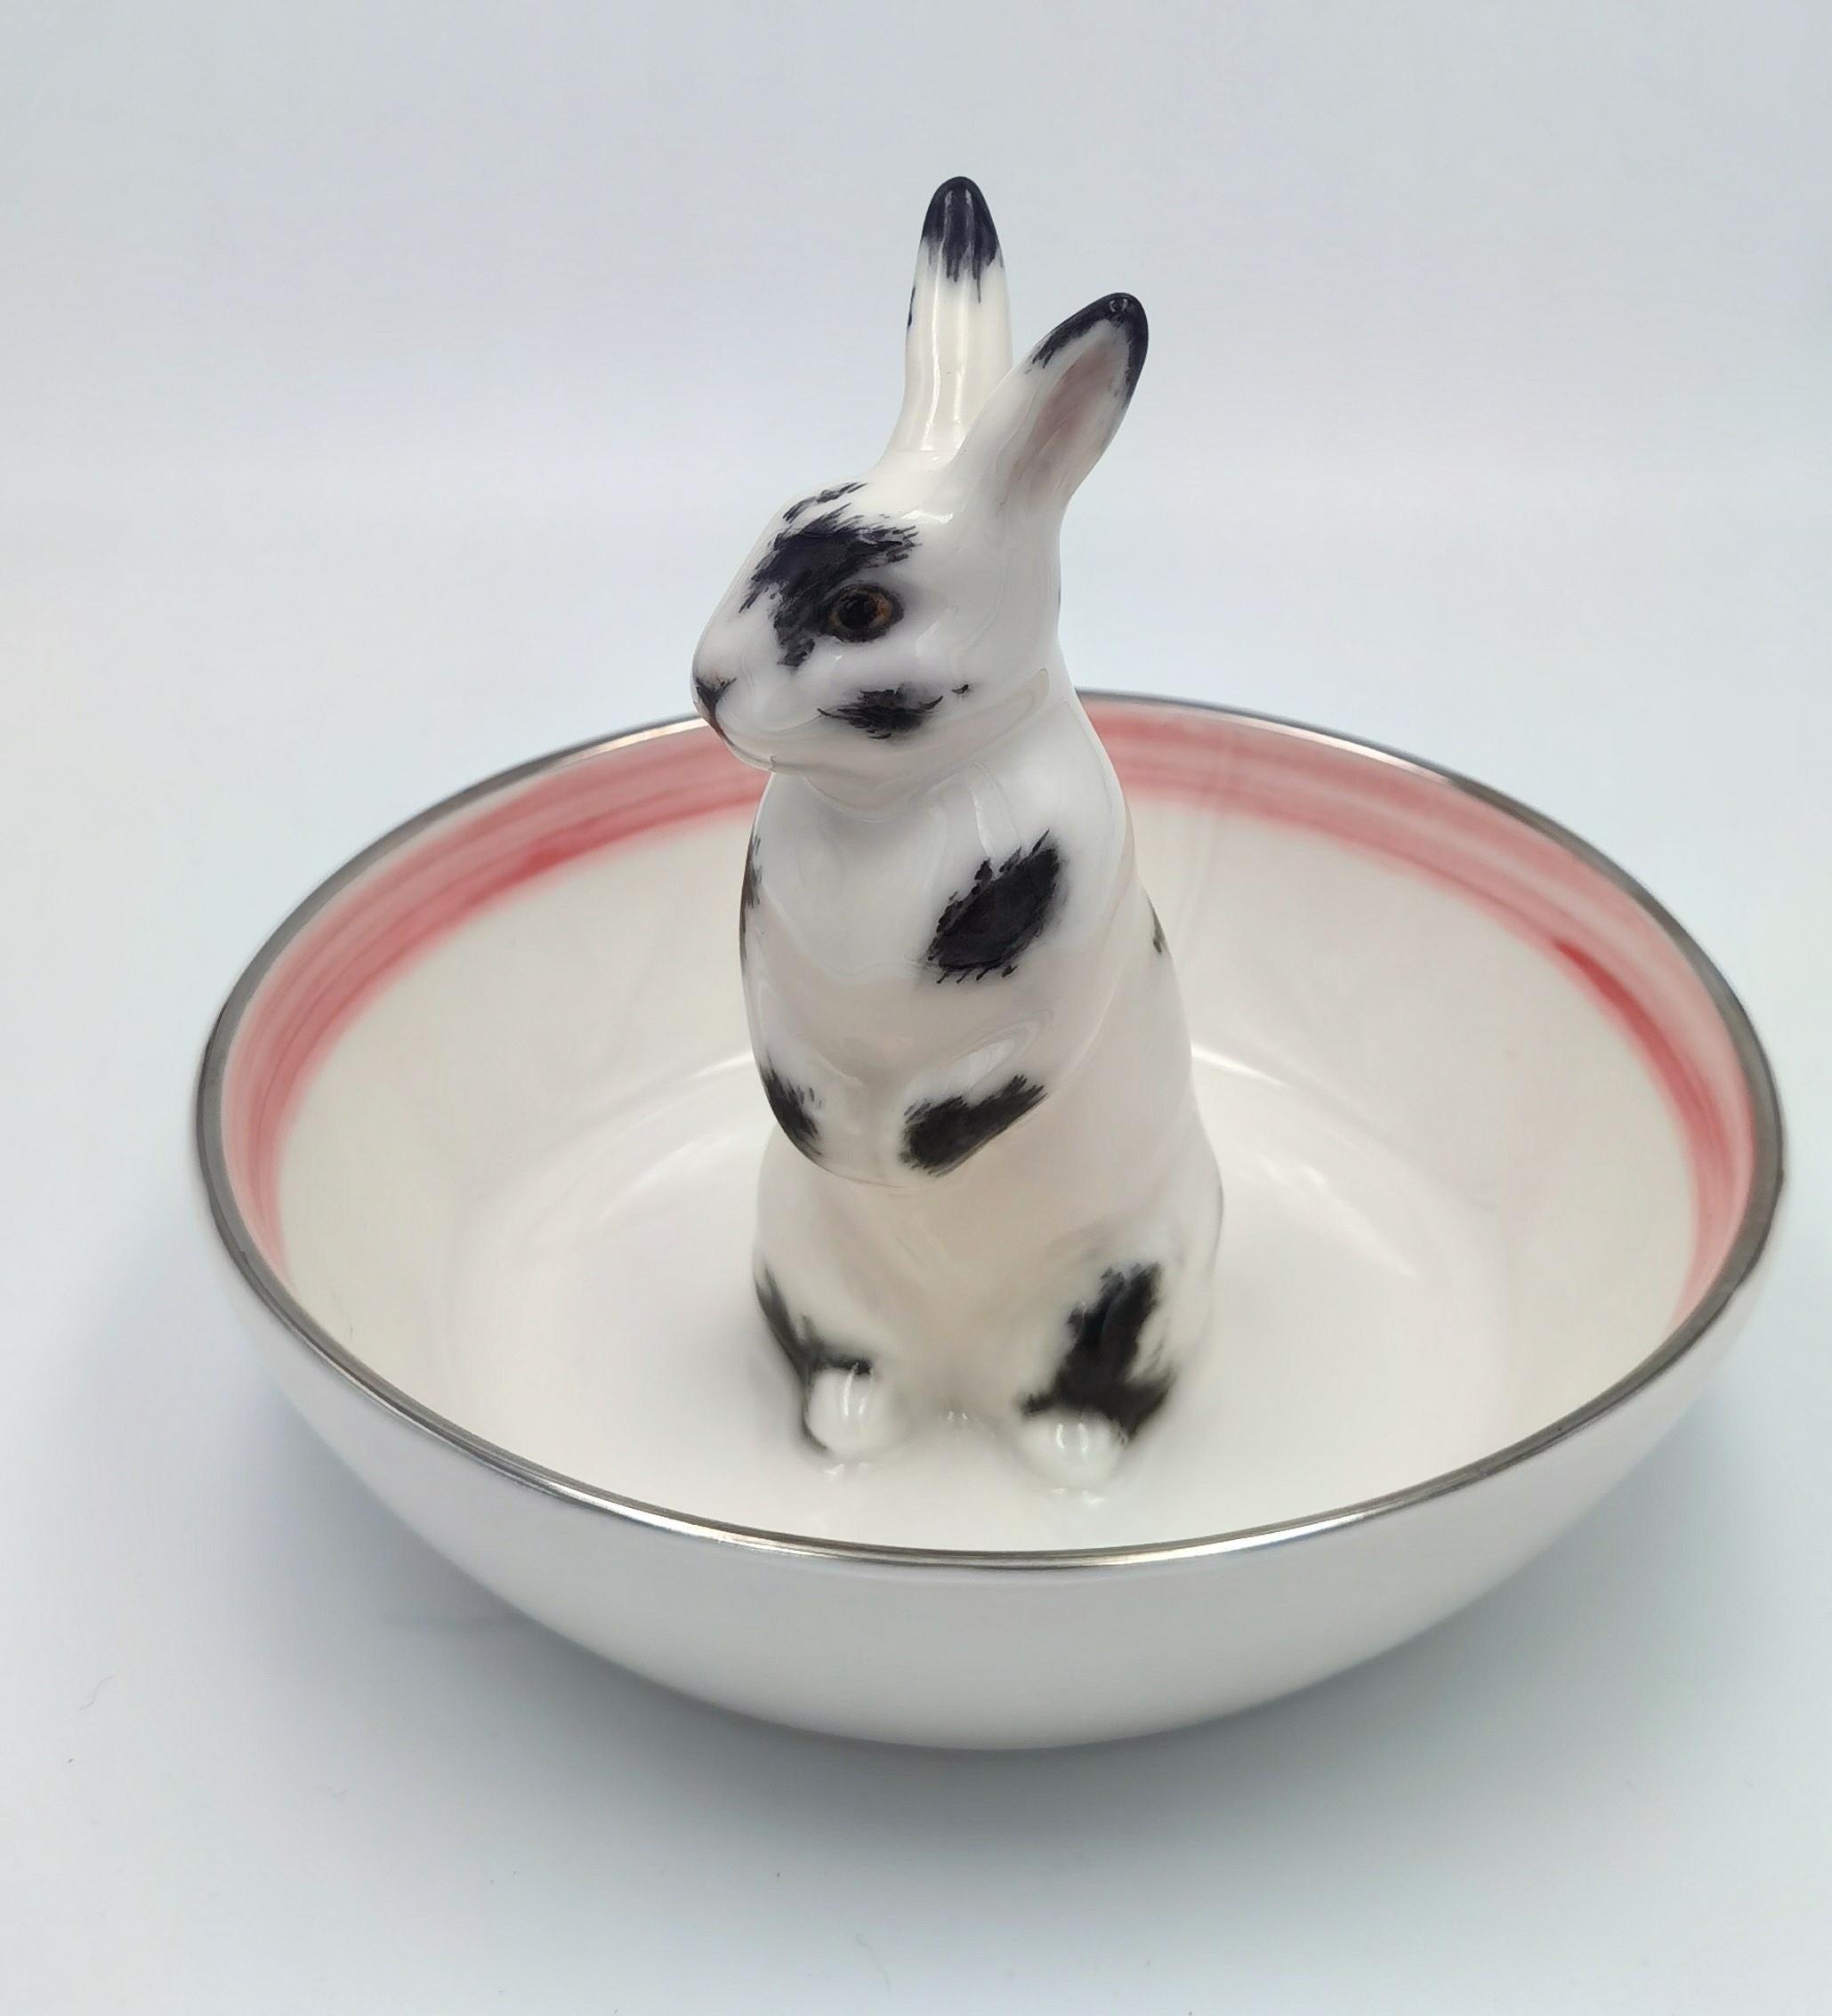 Completely handmade porcelain bowl with a hands-free naturalistic painted Easter rabbit in grey and white colors in country style. The Easter rabbit is sitting in the middle of the bowl for decorating nuts or sweets around the figure. Rimmed with a